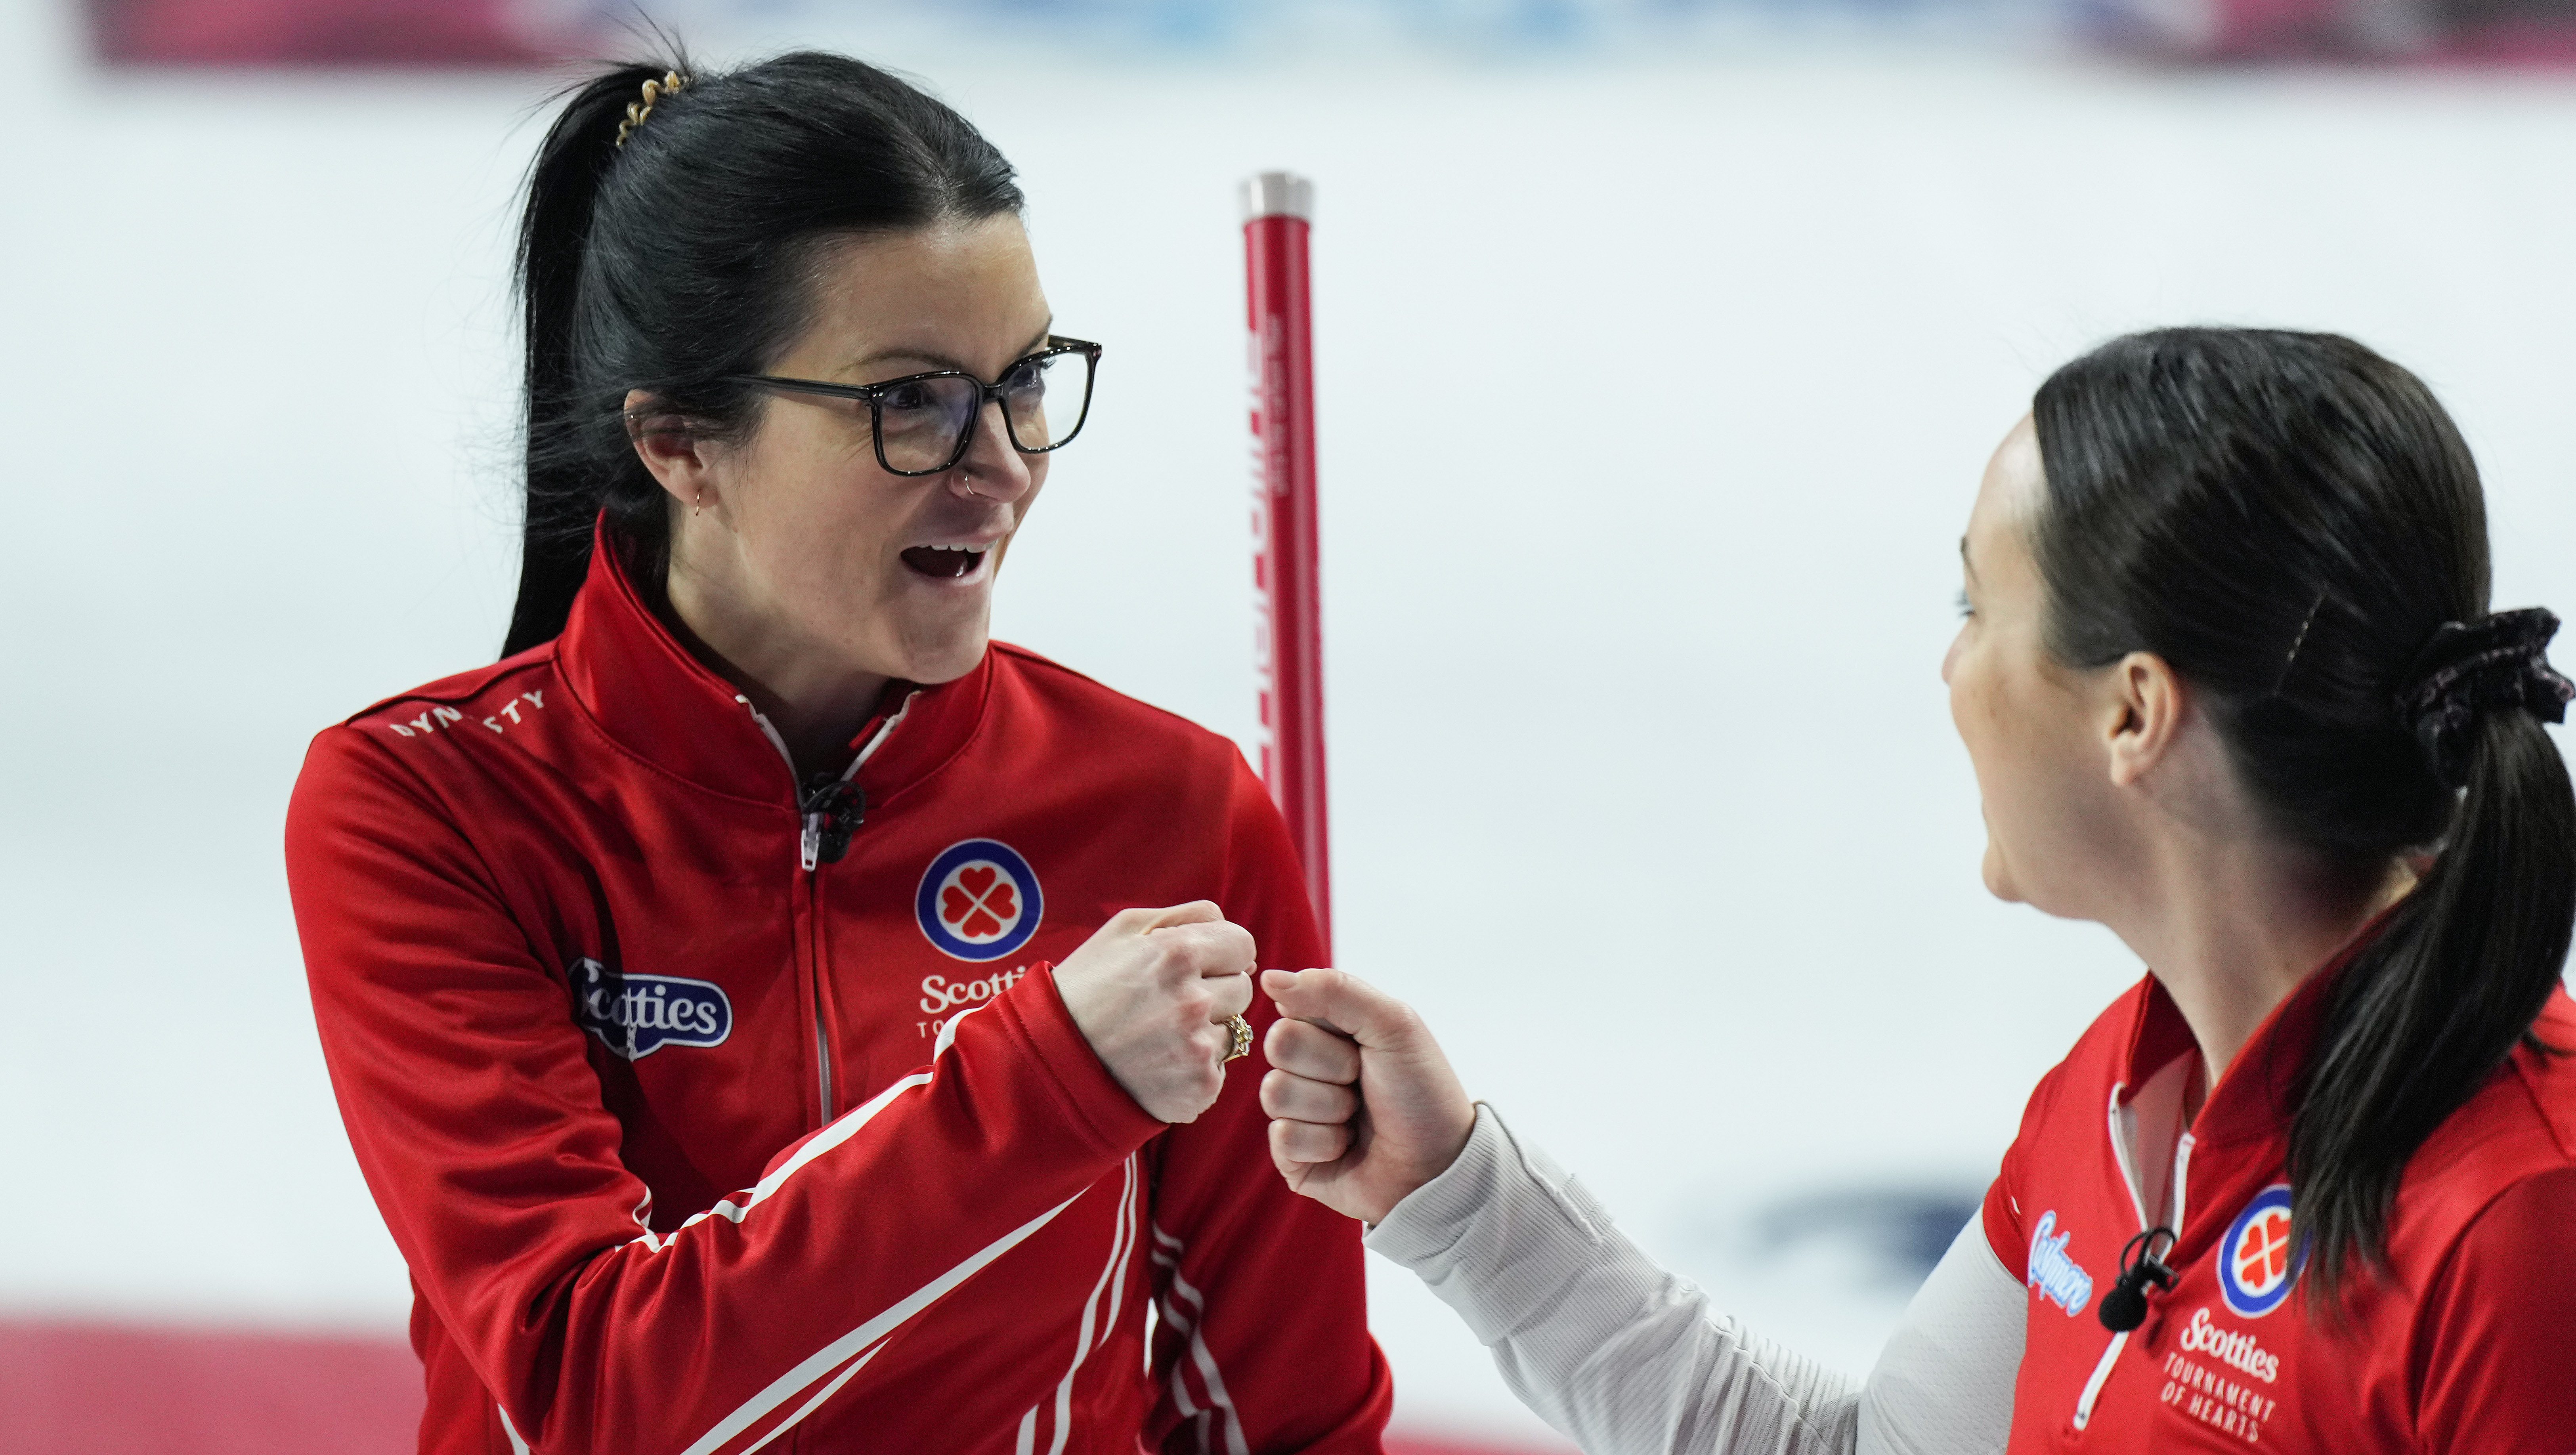 Turkey is a new player on the world women's curling scene. The